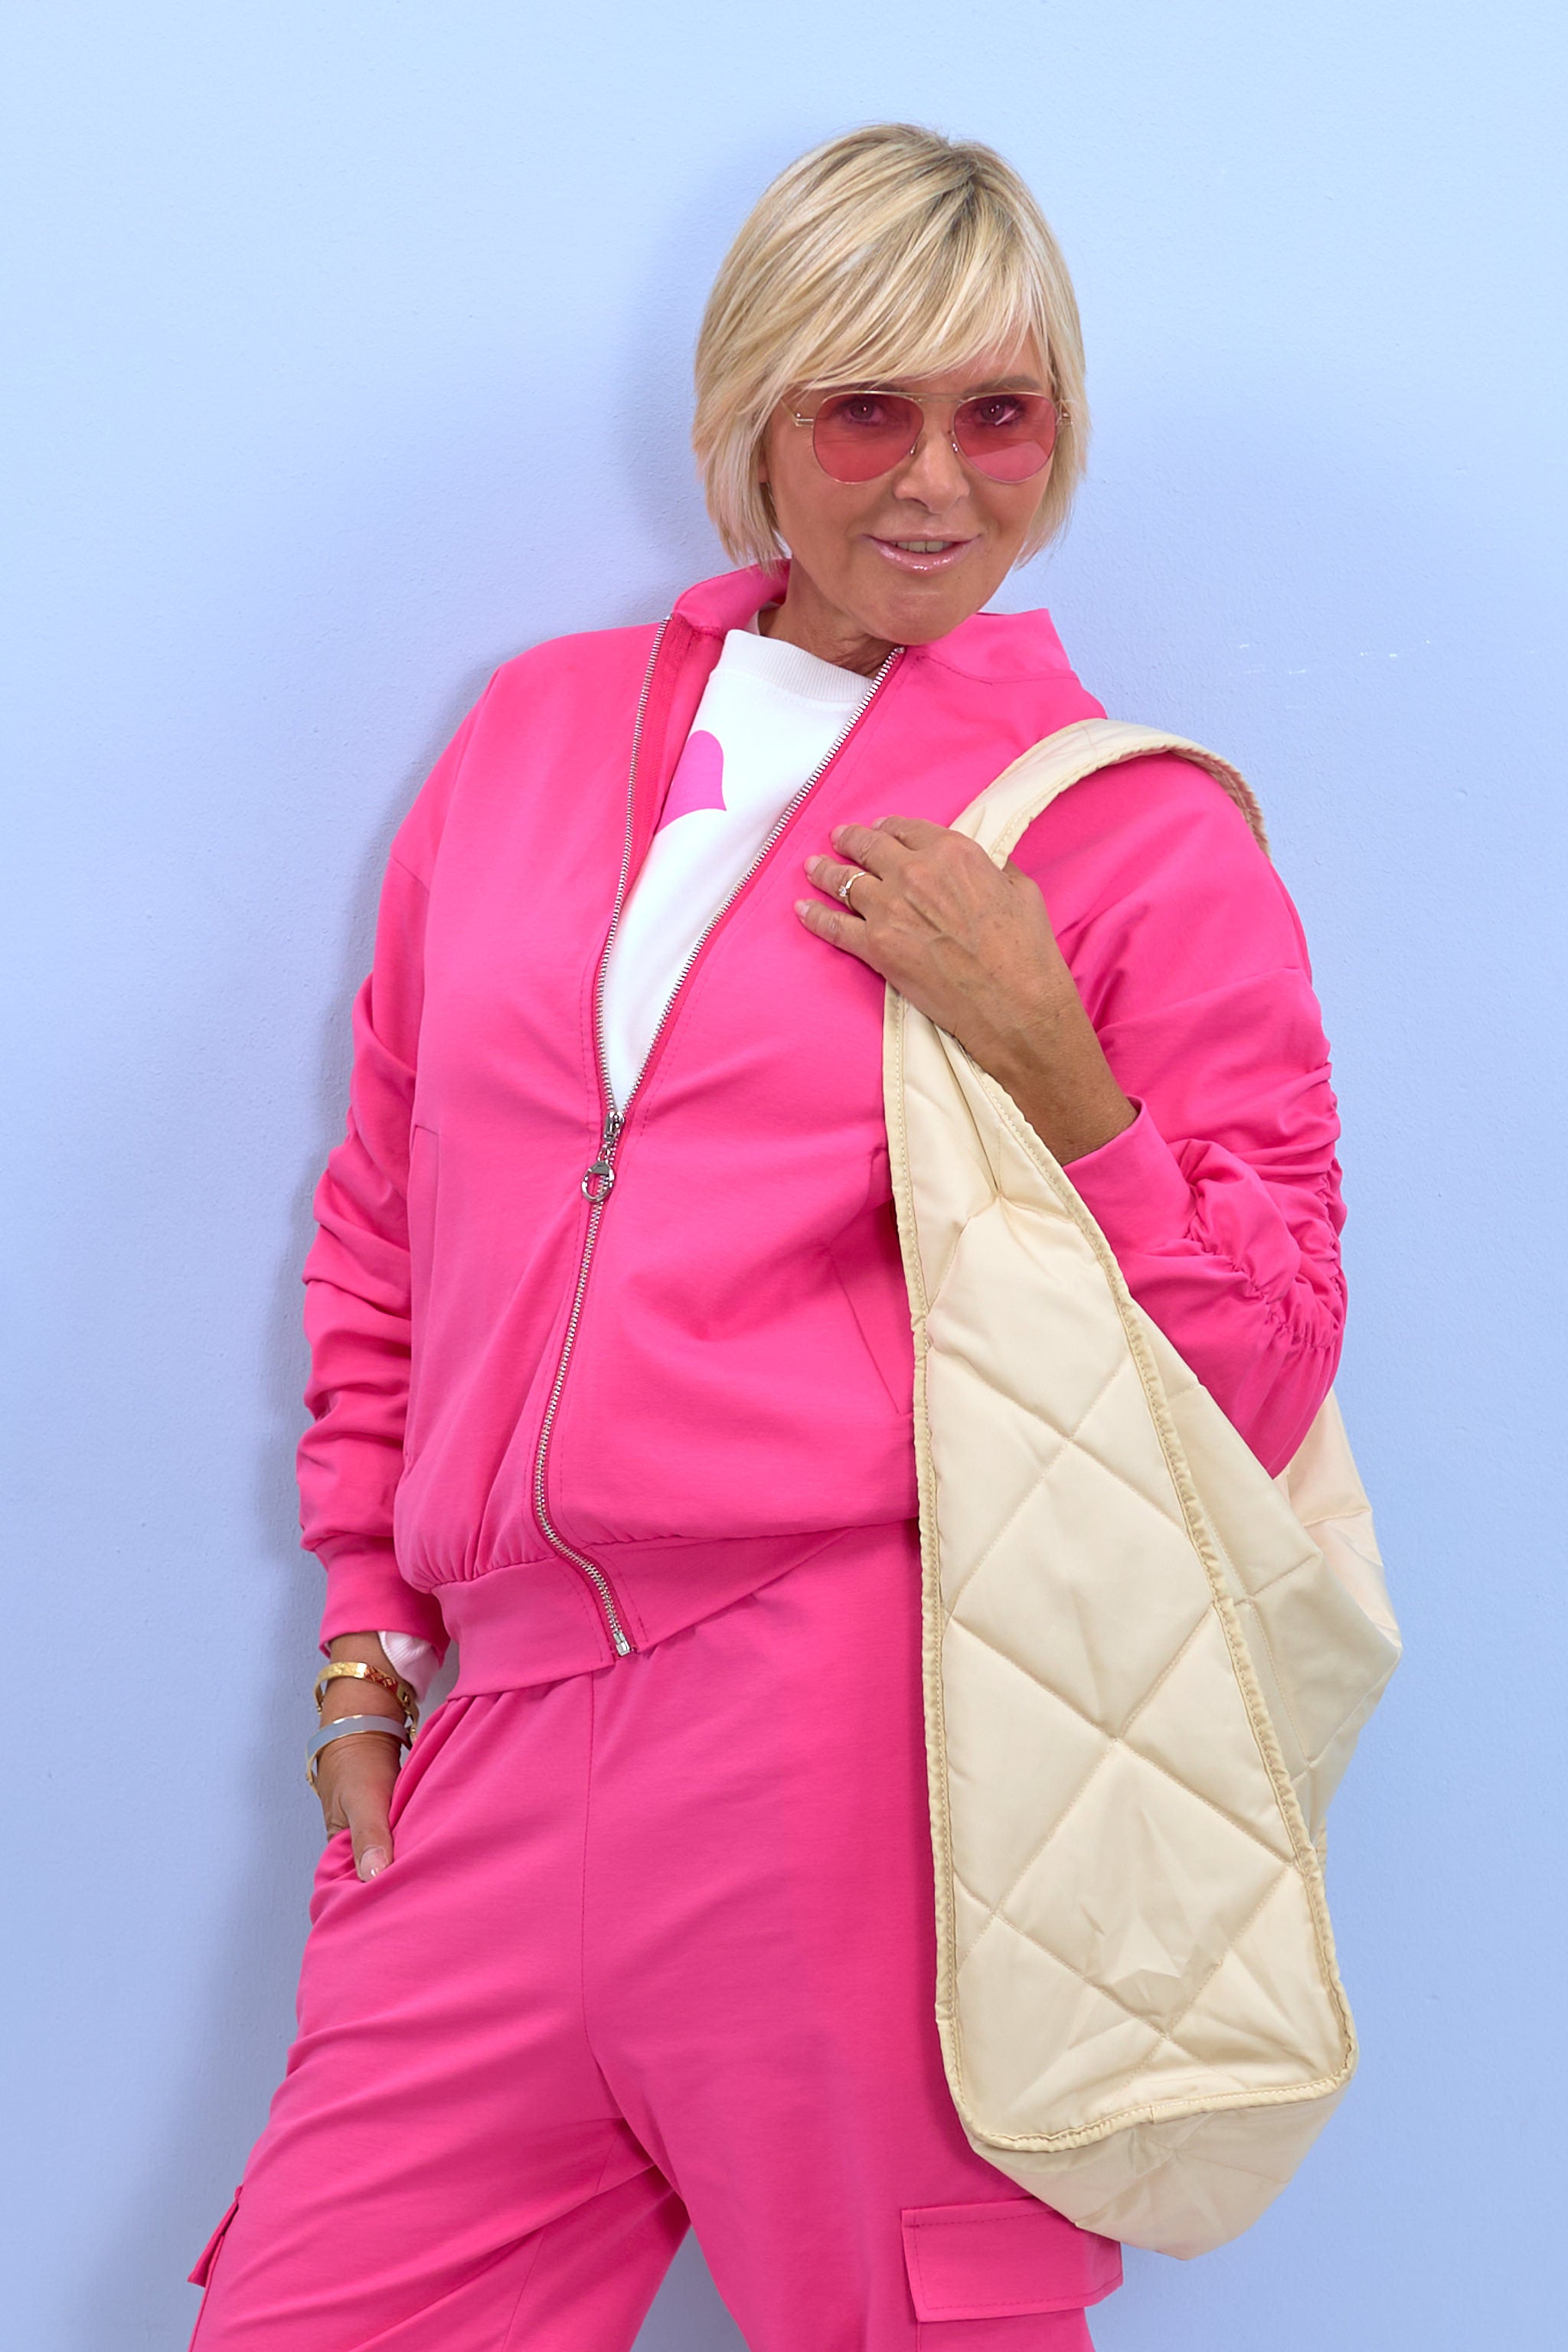 Blouson jacket with ruffled sleeves, pink